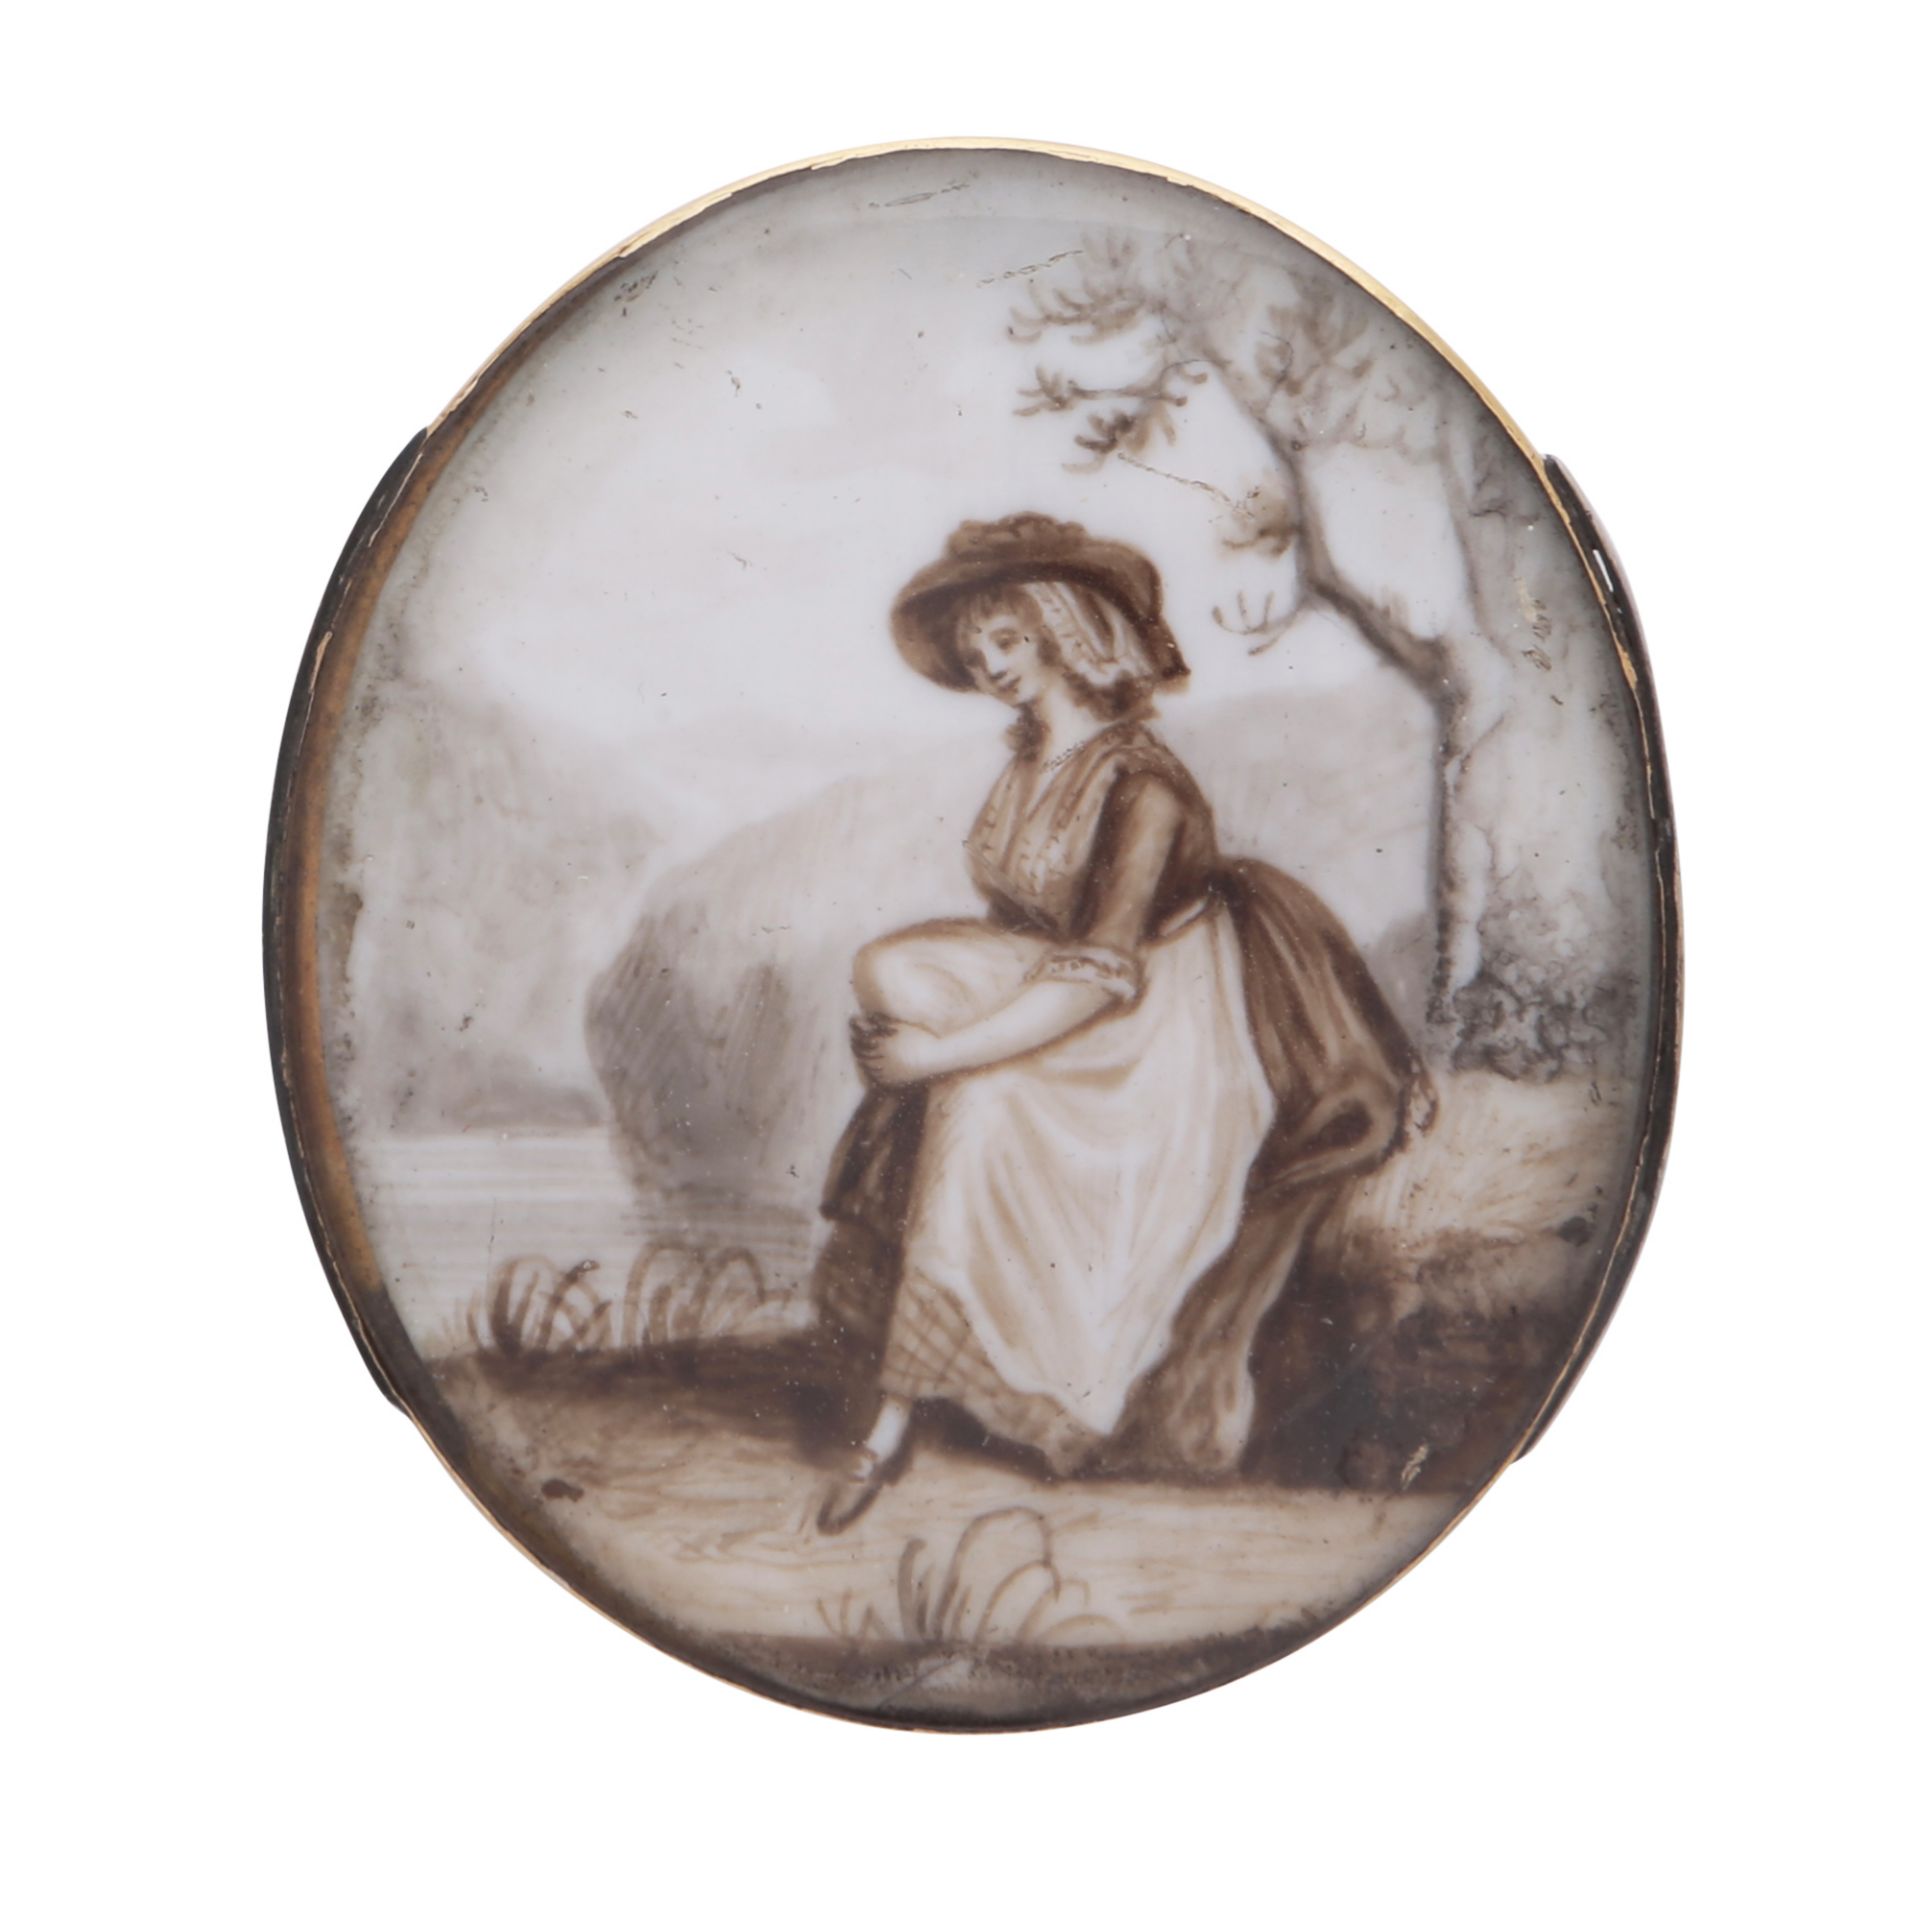 An antique Victorian portrait miniature brooch of oval form, depicting a young lady in an outdoor